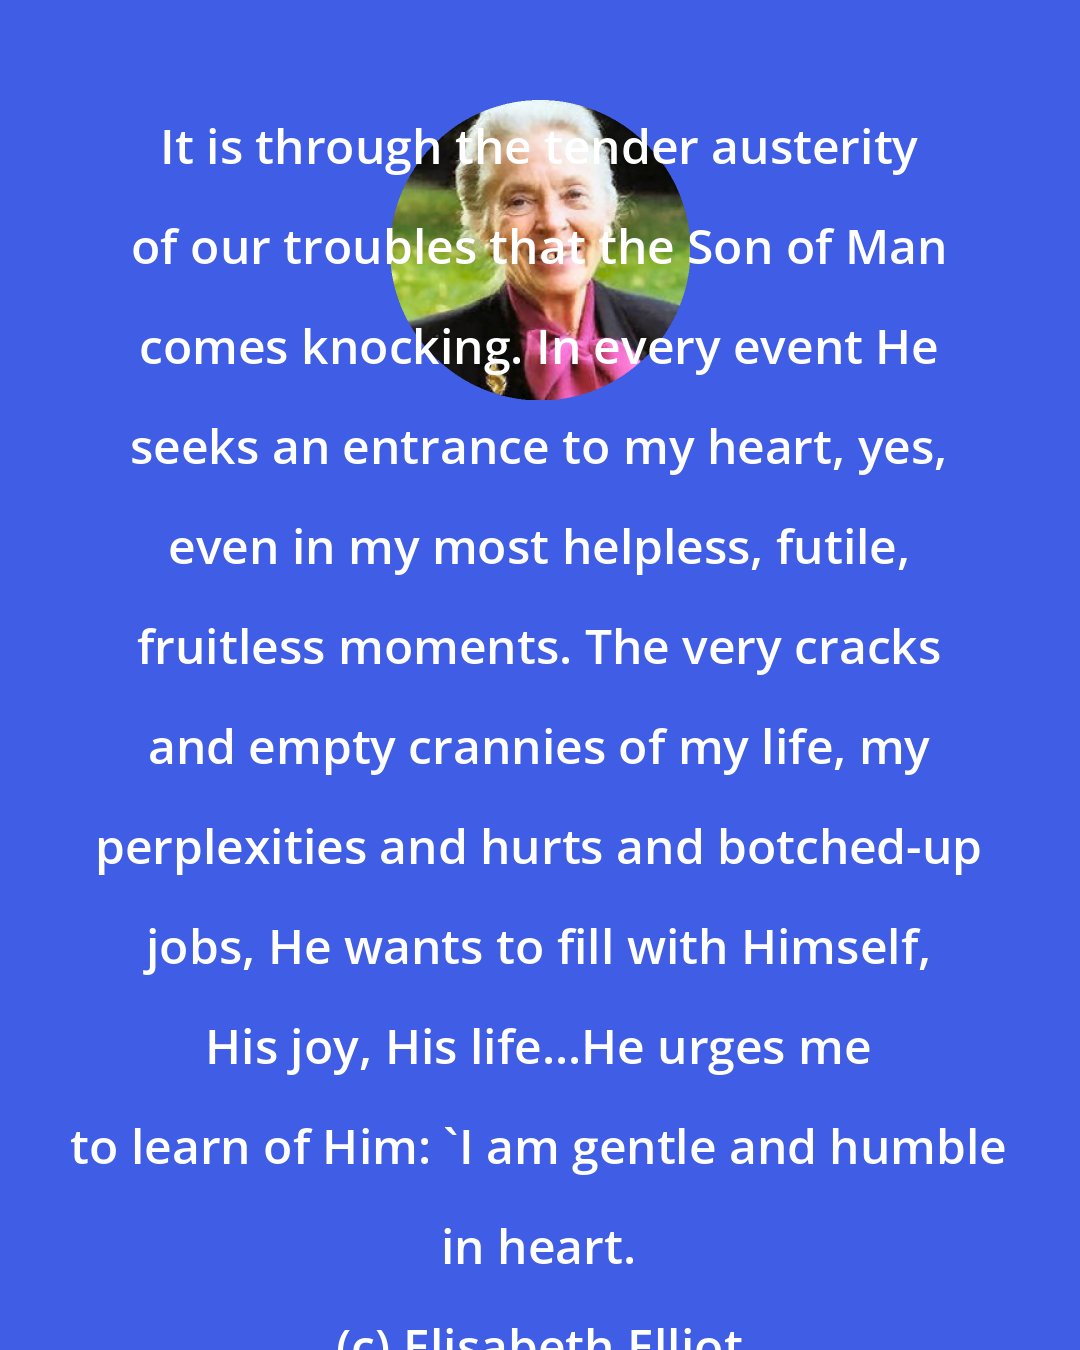 Elisabeth Elliot: It is through the tender austerity of our troubles that the Son of Man comes knocking. In every event He seeks an entrance to my heart, yes, even in my most helpless, futile, fruitless moments. The very cracks and empty crannies of my life, my perplexities and hurts and botched-up jobs, He wants to fill with Himself, His joy, His life...He urges me to learn of Him: 'I am gentle and humble in heart.